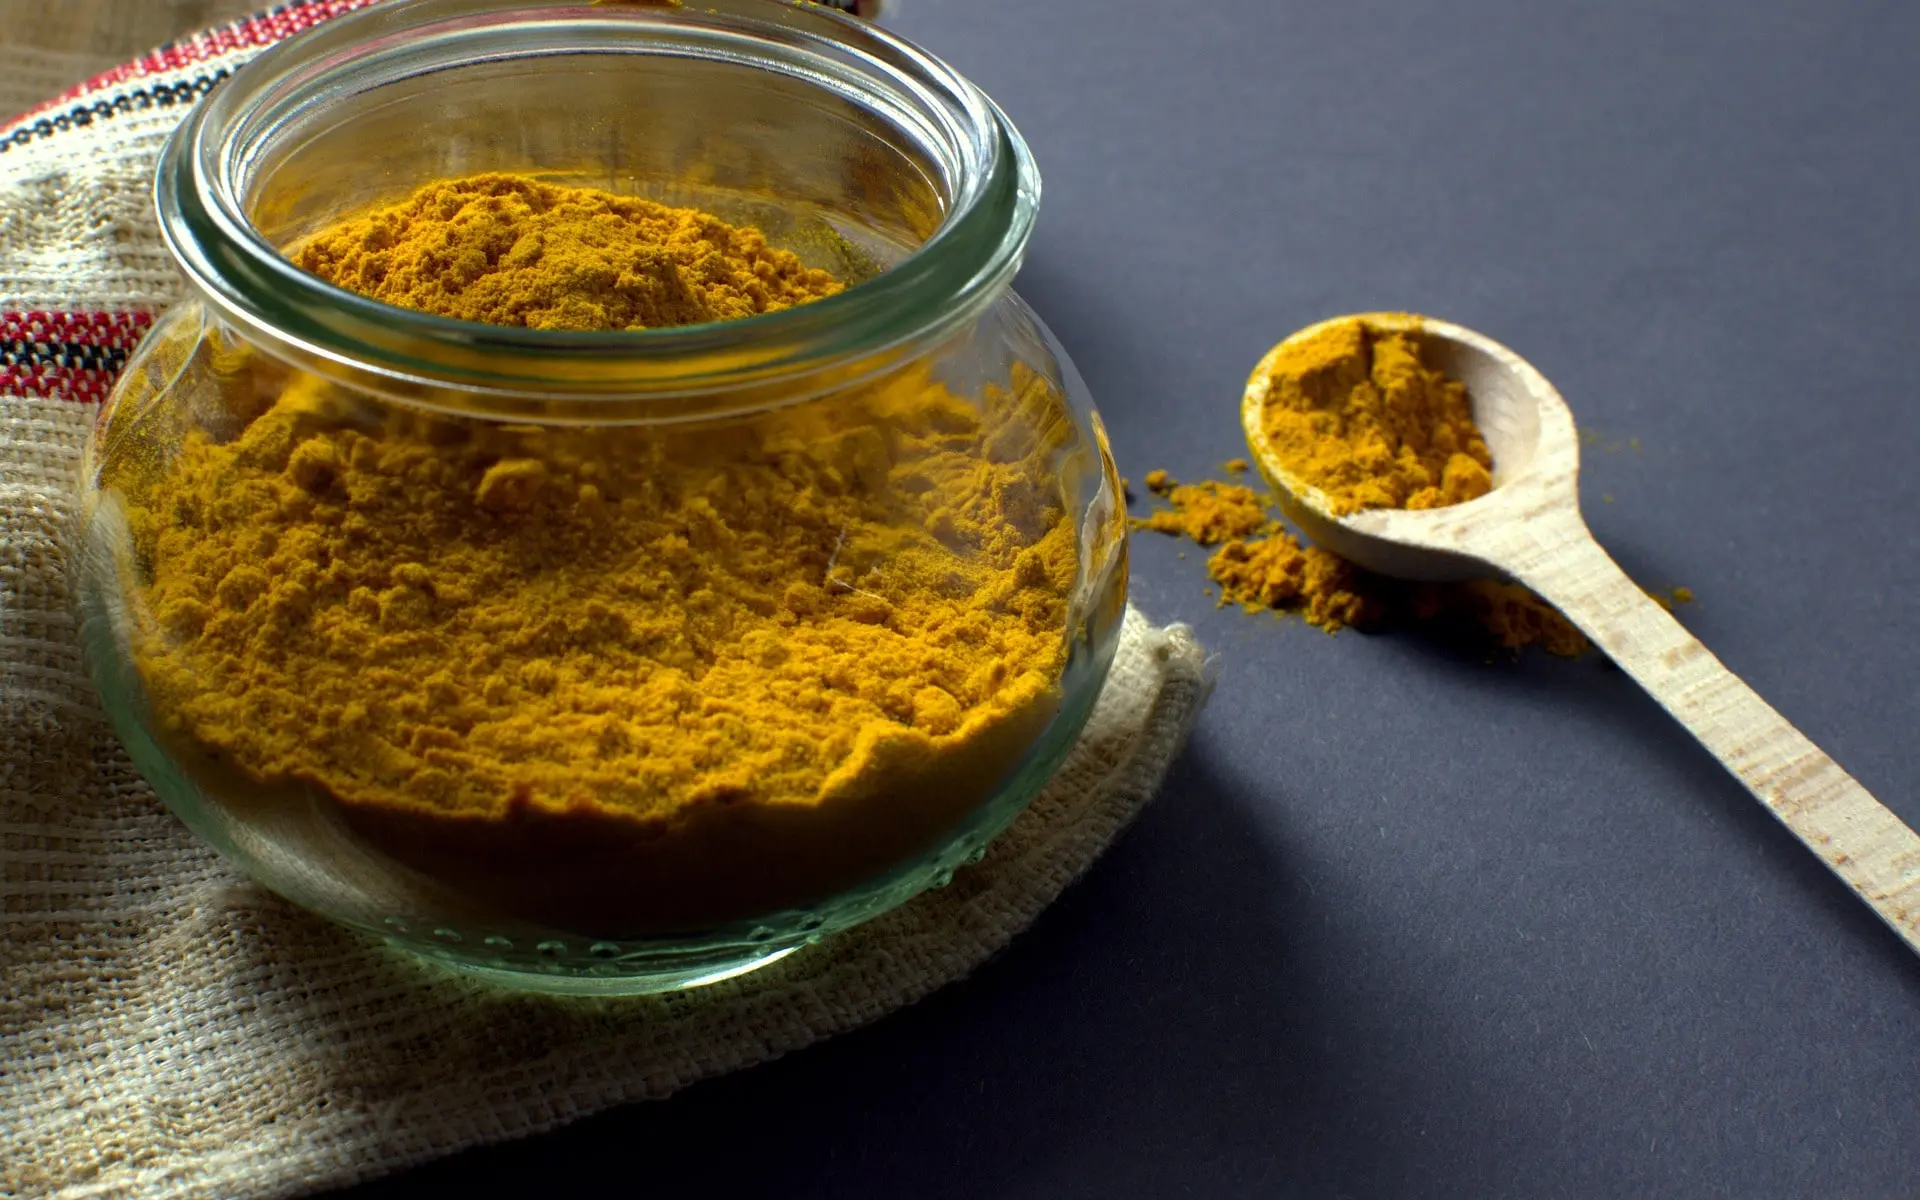 New Research - Turmeric as Effective as Pharmaceuticals